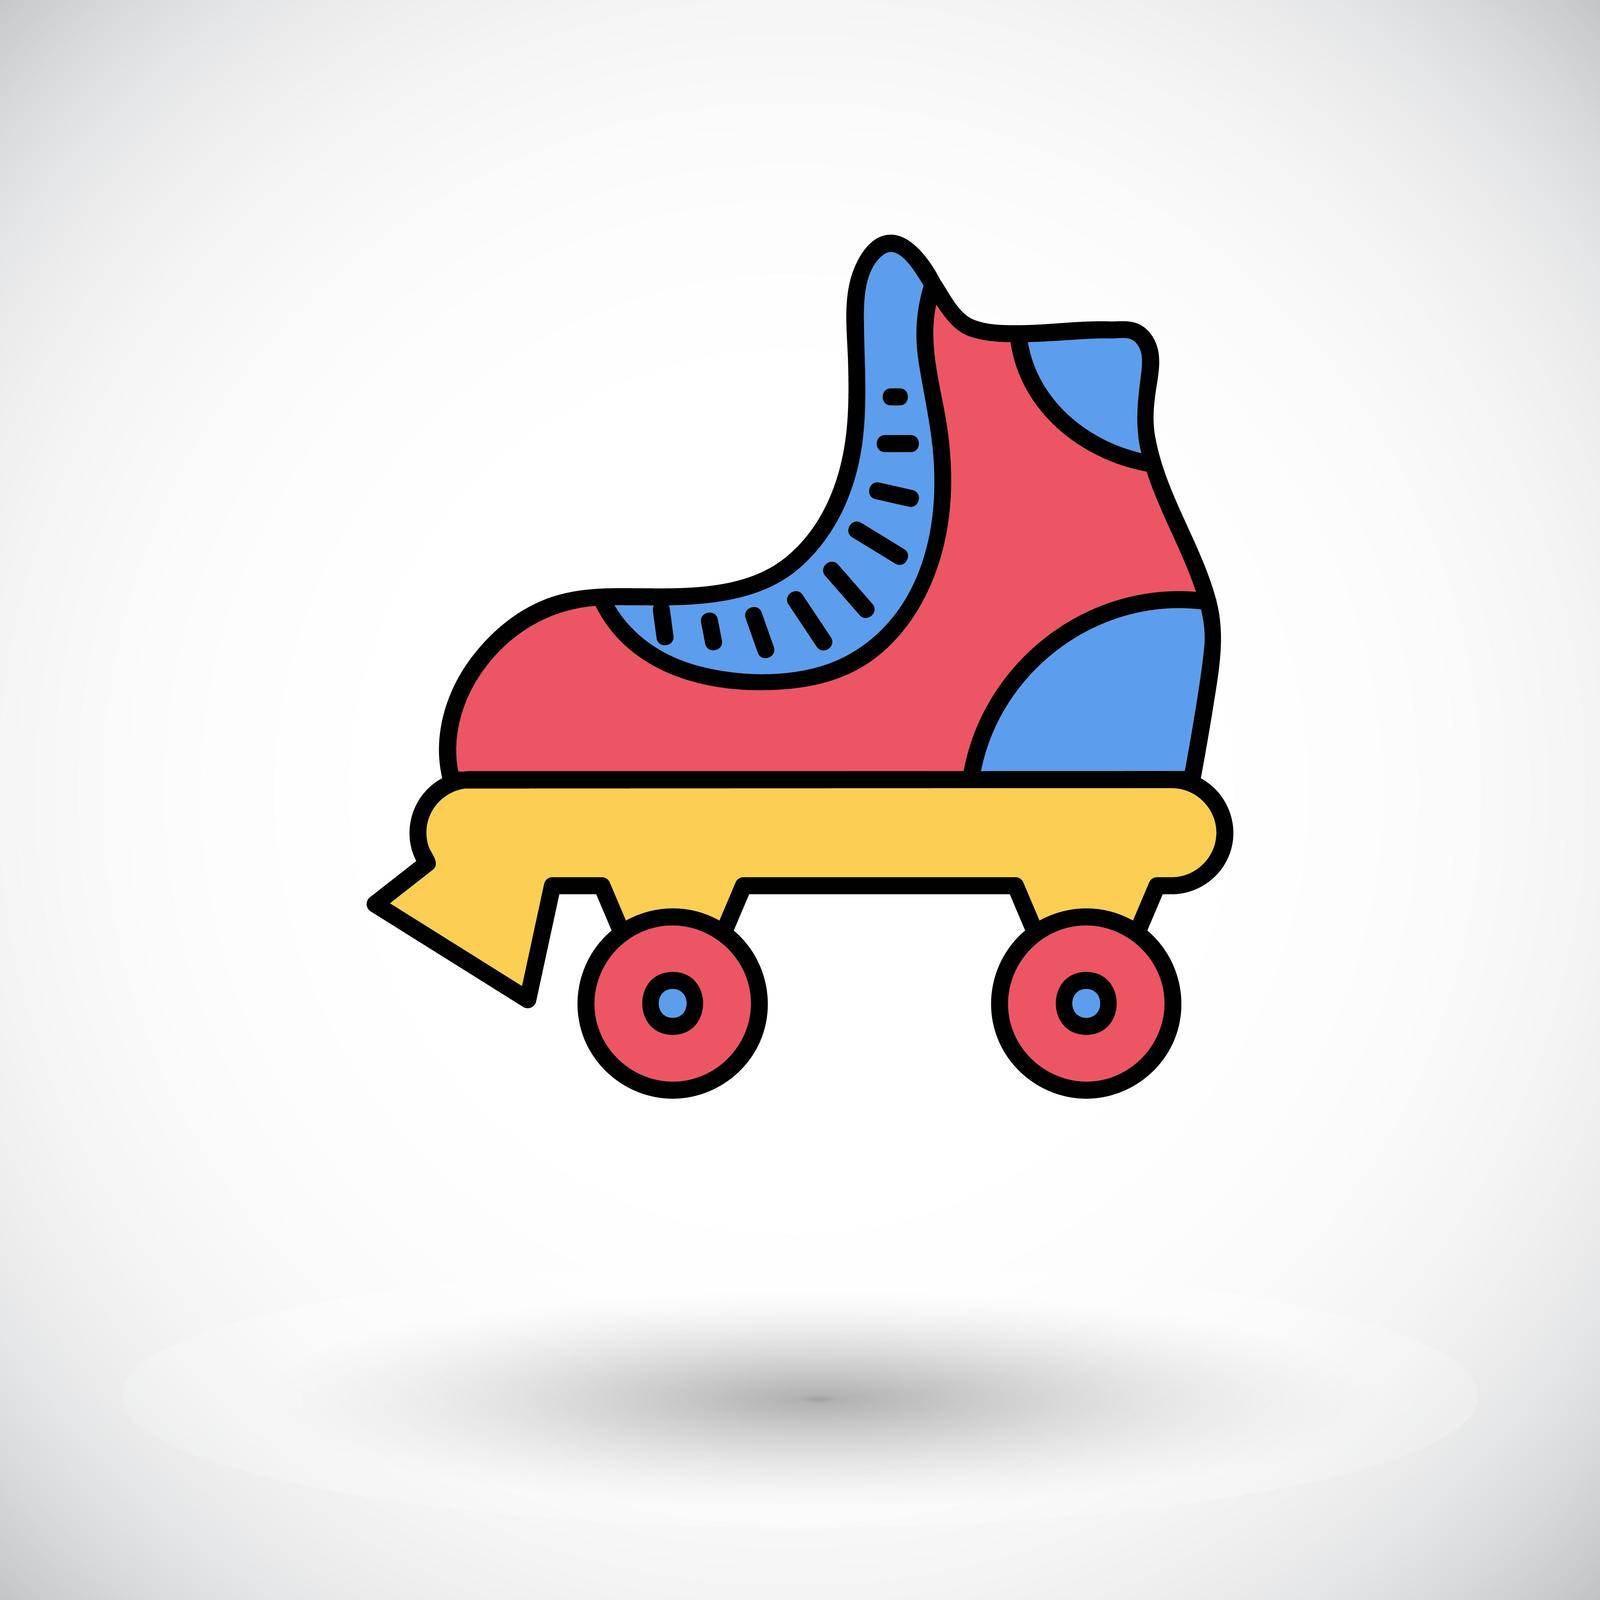 Roller skate icon. Flat vector related icon for web and mobile applications. It can be used as - logo, pictogram, icon, infographic element. Vector Illustration.